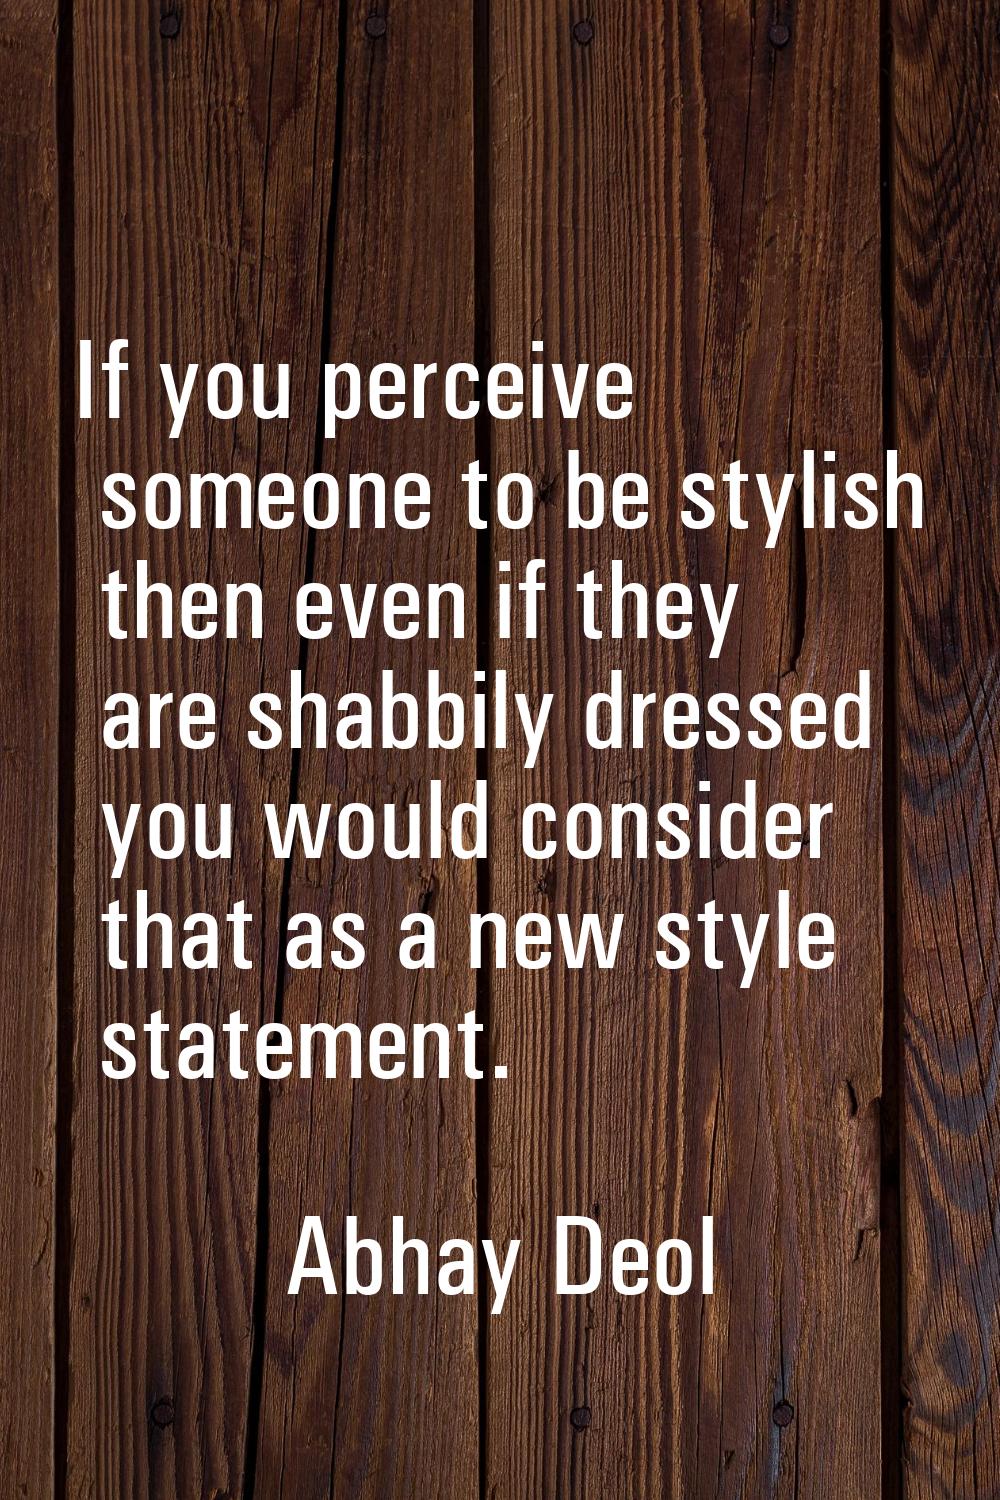 If you perceive someone to be stylish then even if they are shabbily dressed you would consider tha